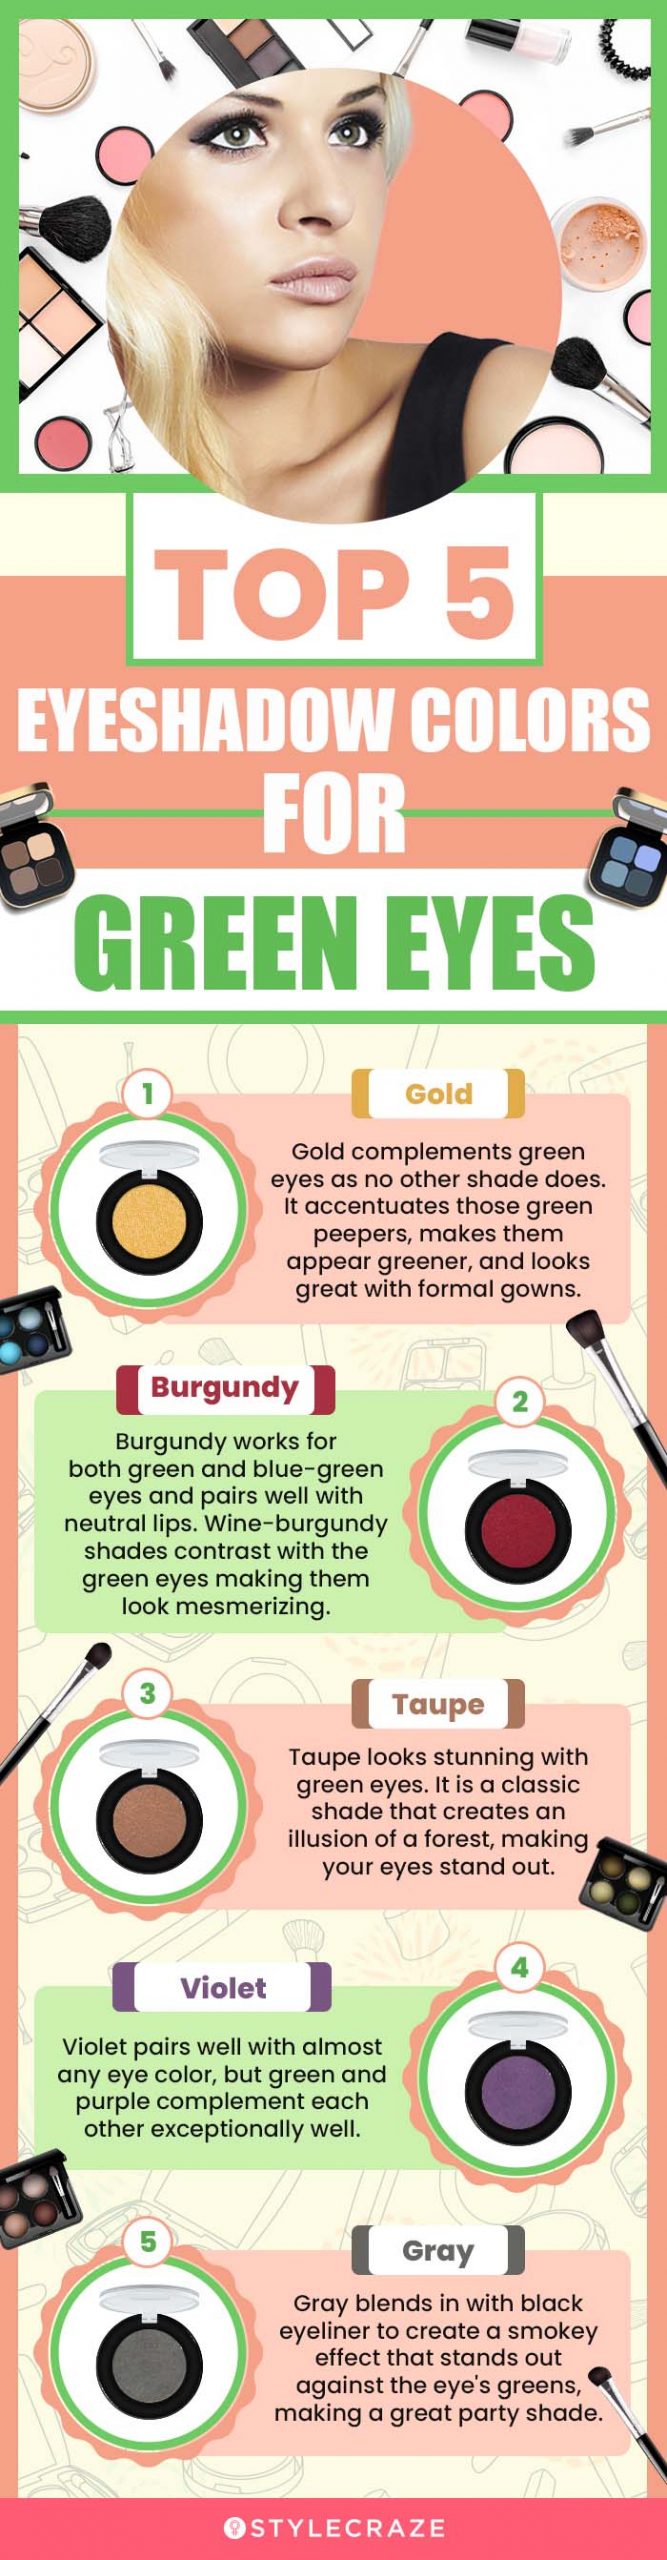 top 5 eyeshadow colors for green eyes (infographic)